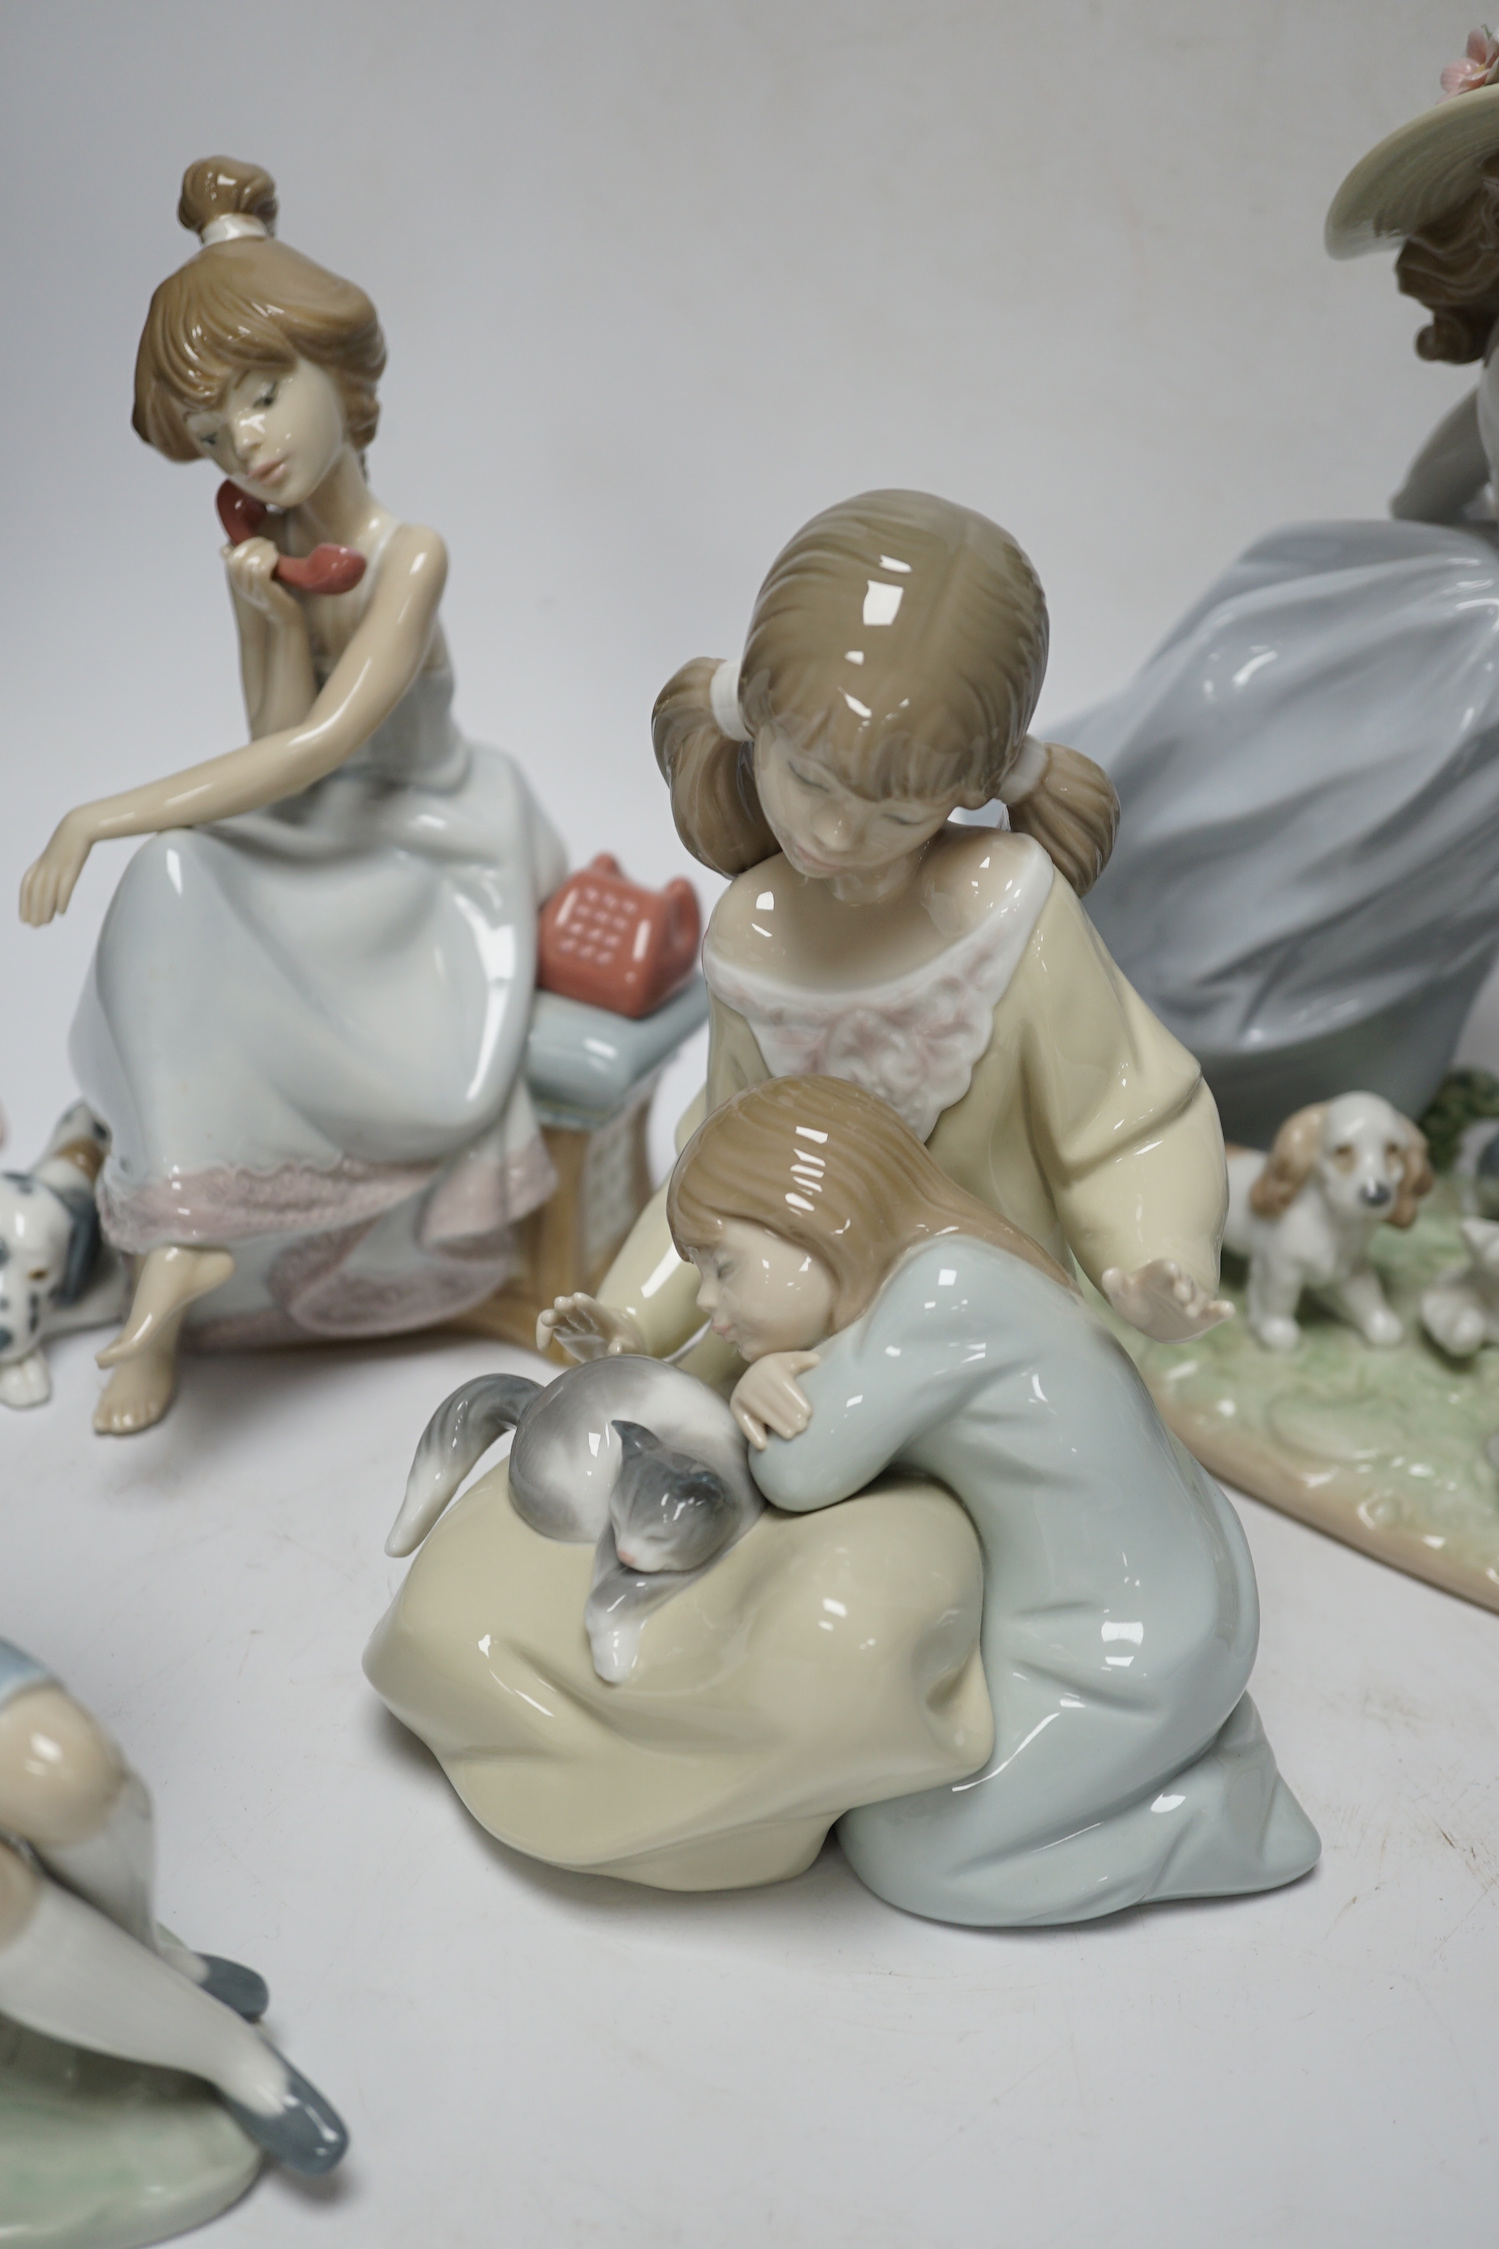 A large Lladro figure group “La gran familia, Puppy Brigade”, Baby Jesus, Duckling, New Friend, Chit-Chat, Sunday’s Child, Little Sister, Cat and Mouse and heavenly Tenor (9), largest 30 cm wide